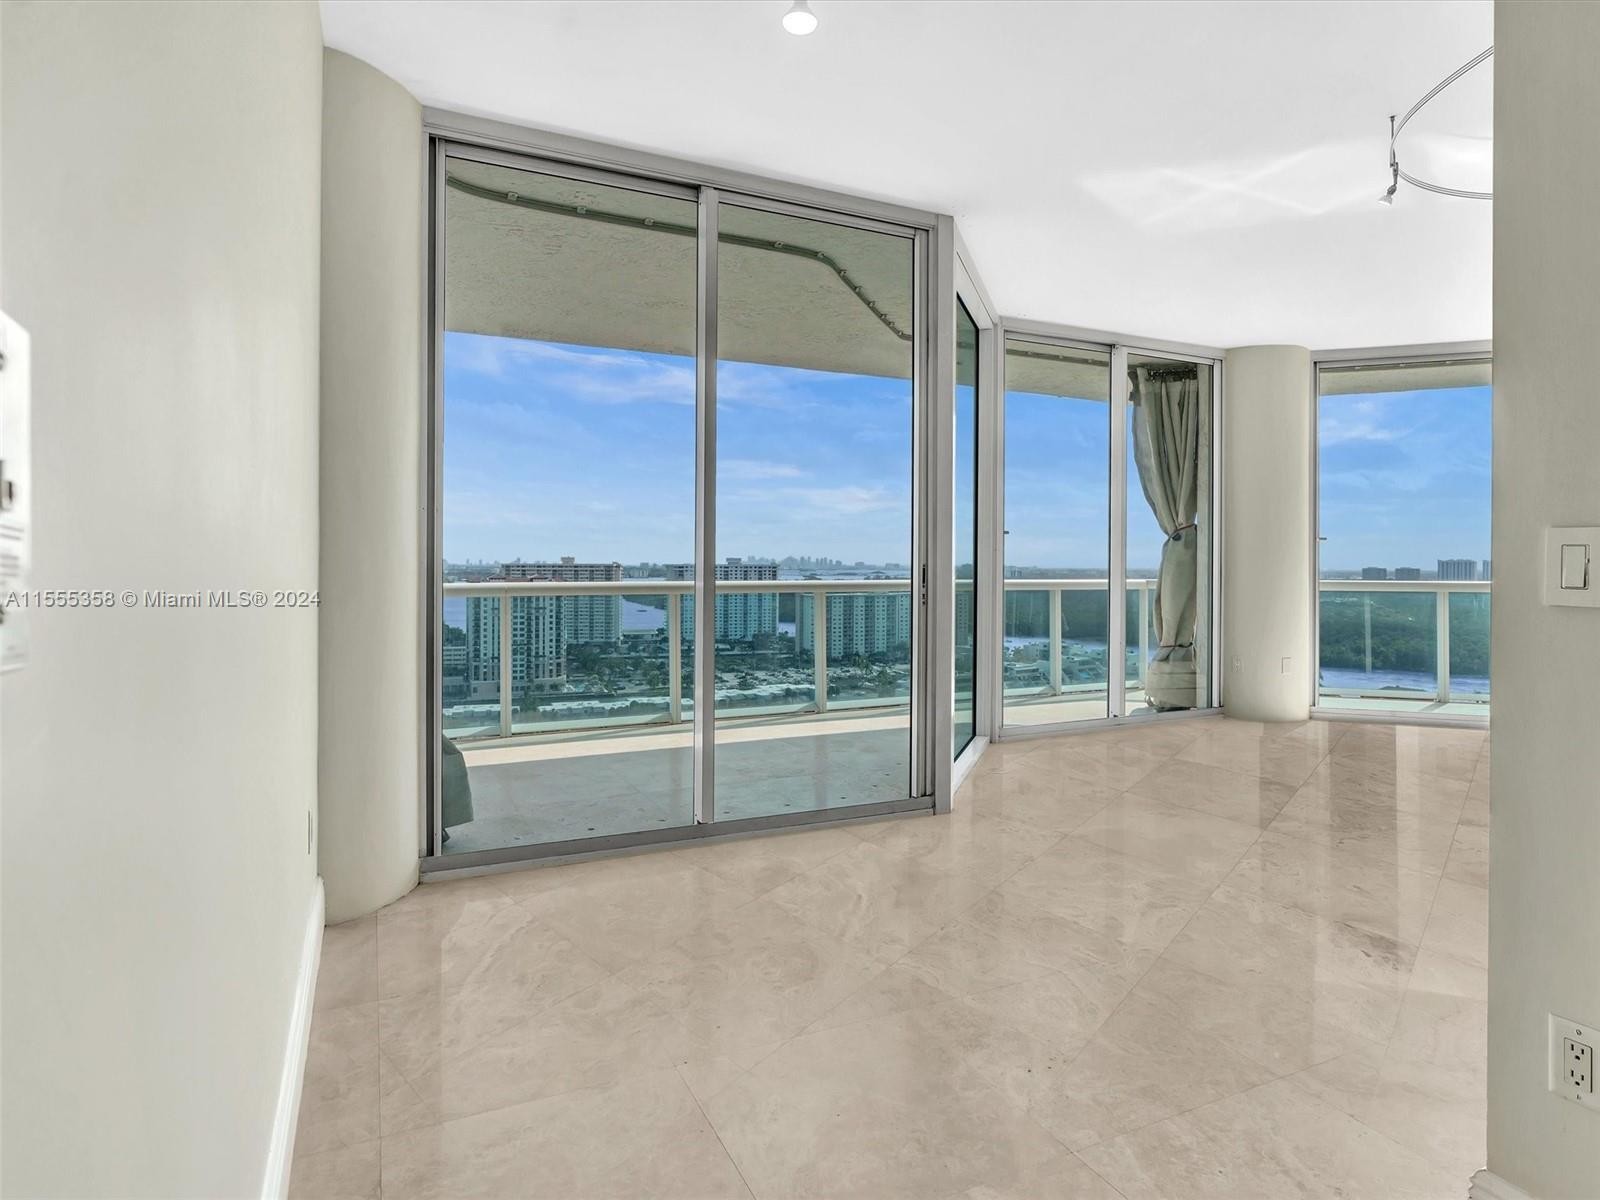 23. 16500 Collins Ave